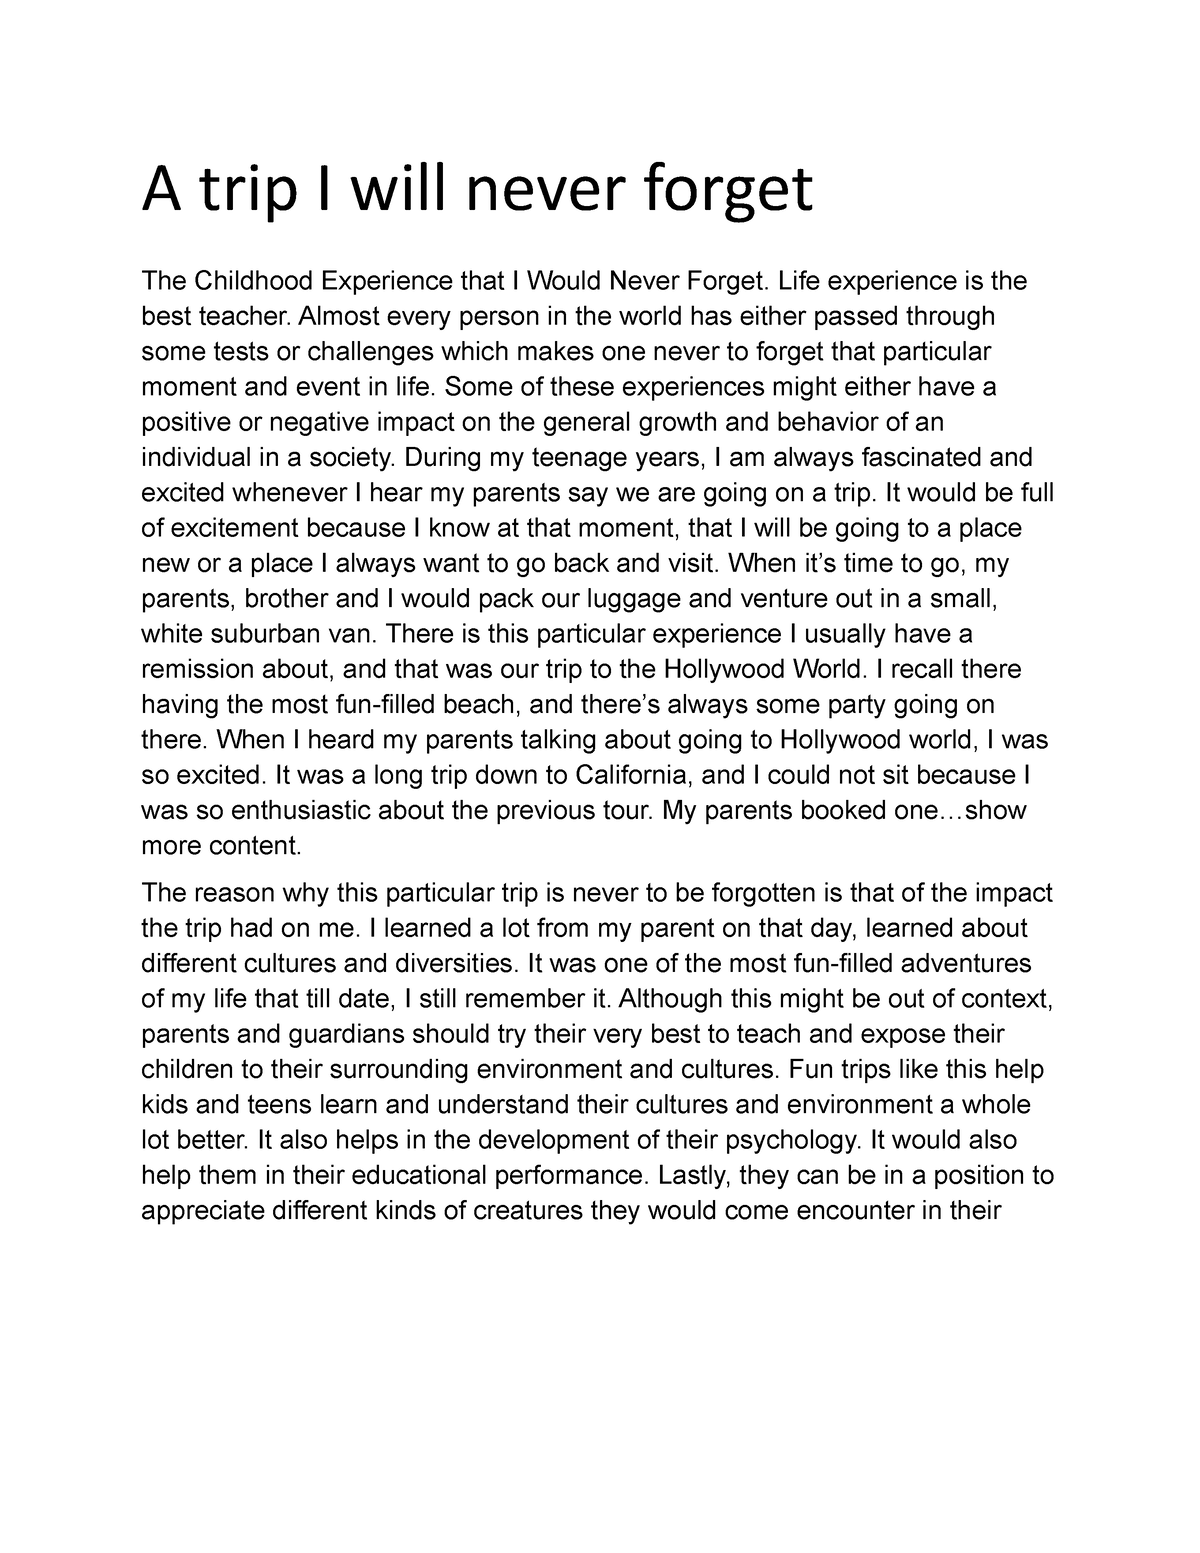 write an essay on a day u will never forget